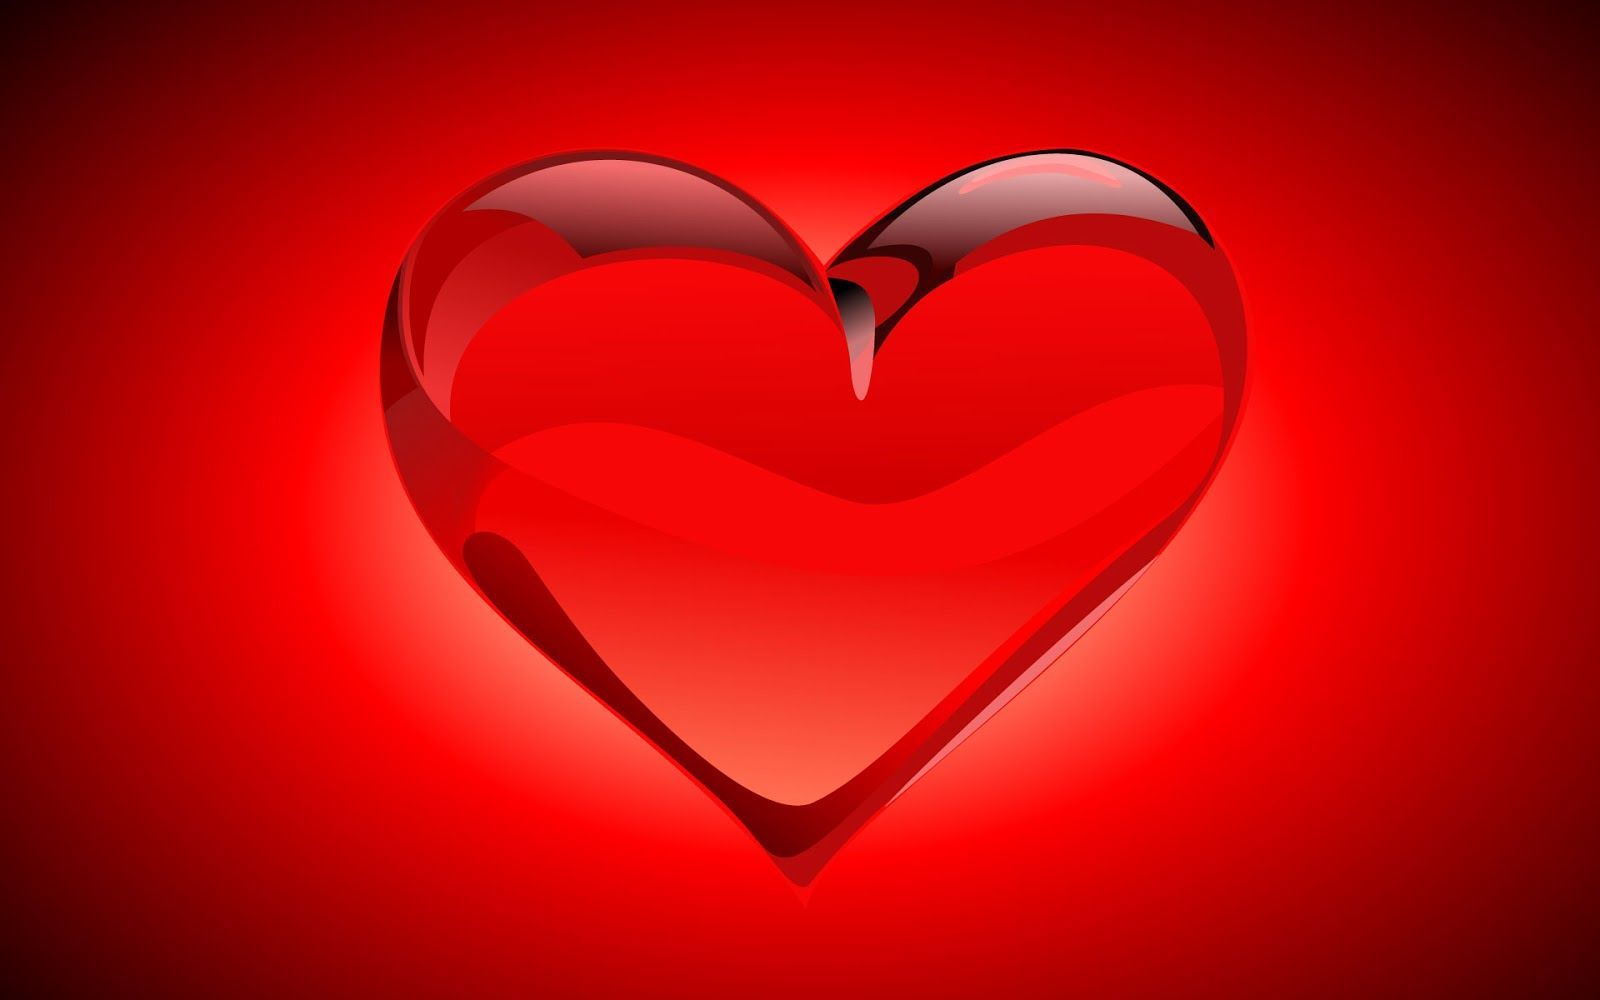 Red heart wallpaper, heart wallpapers | Amazing Wallpapers